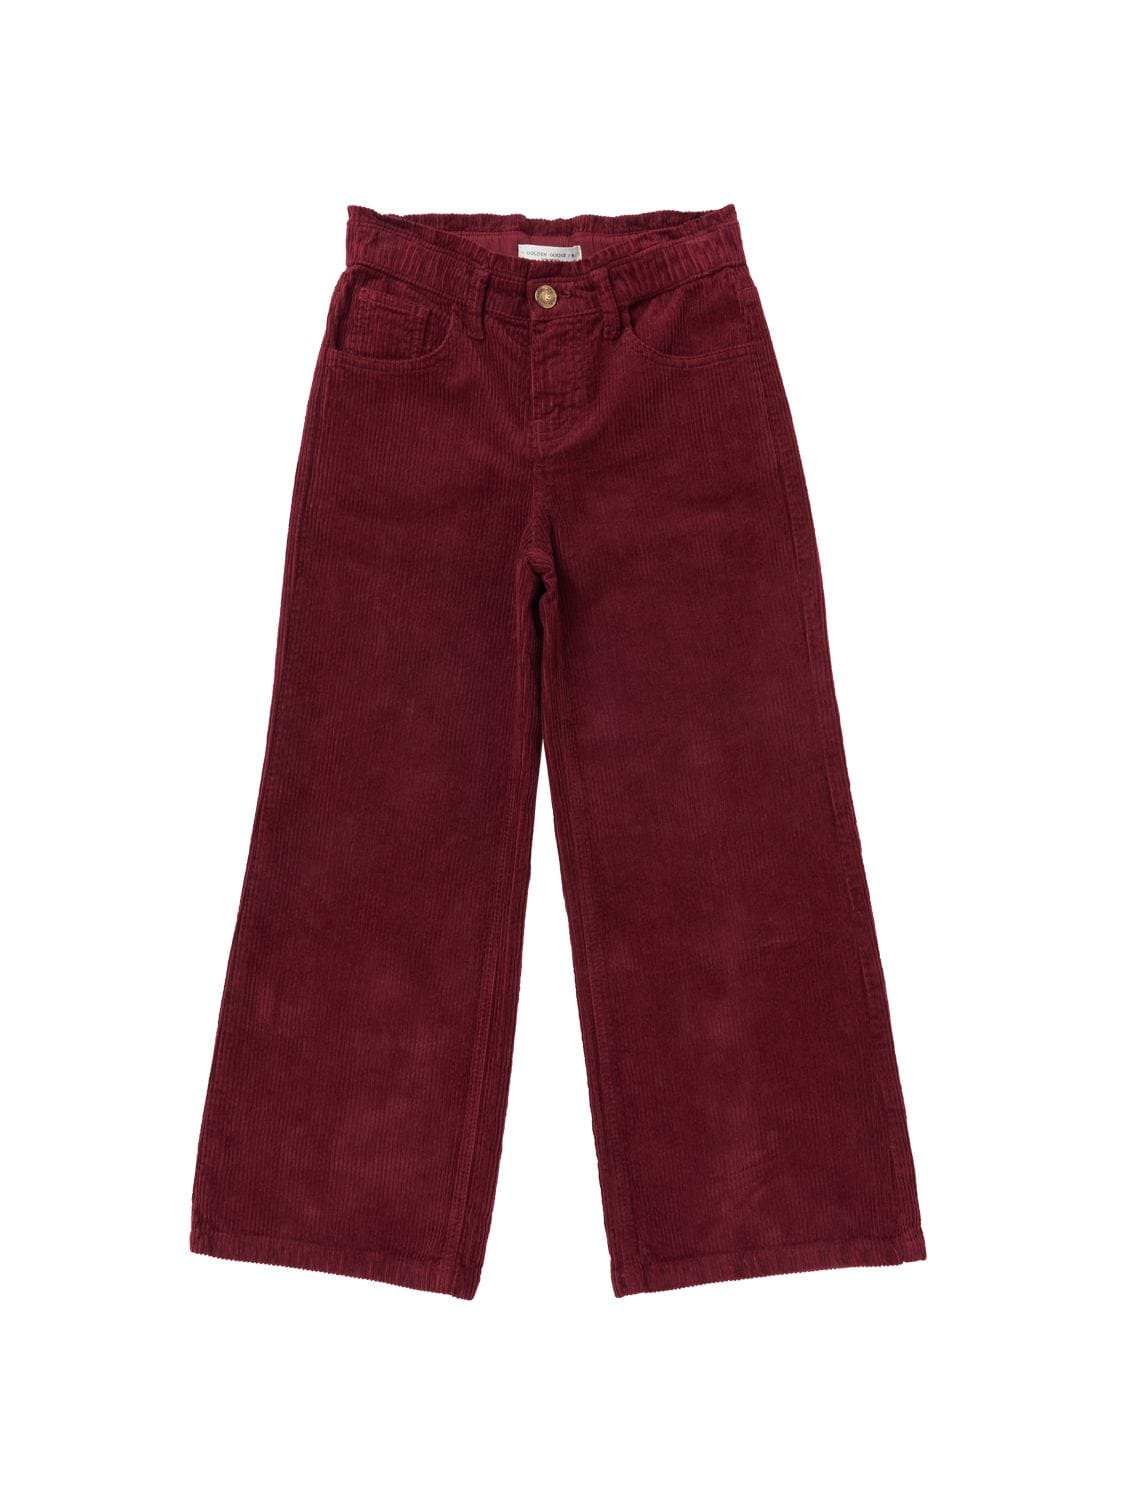 Golden Goose Kids' Embroidered Cotton Corduroy Trousers In Bordeaux